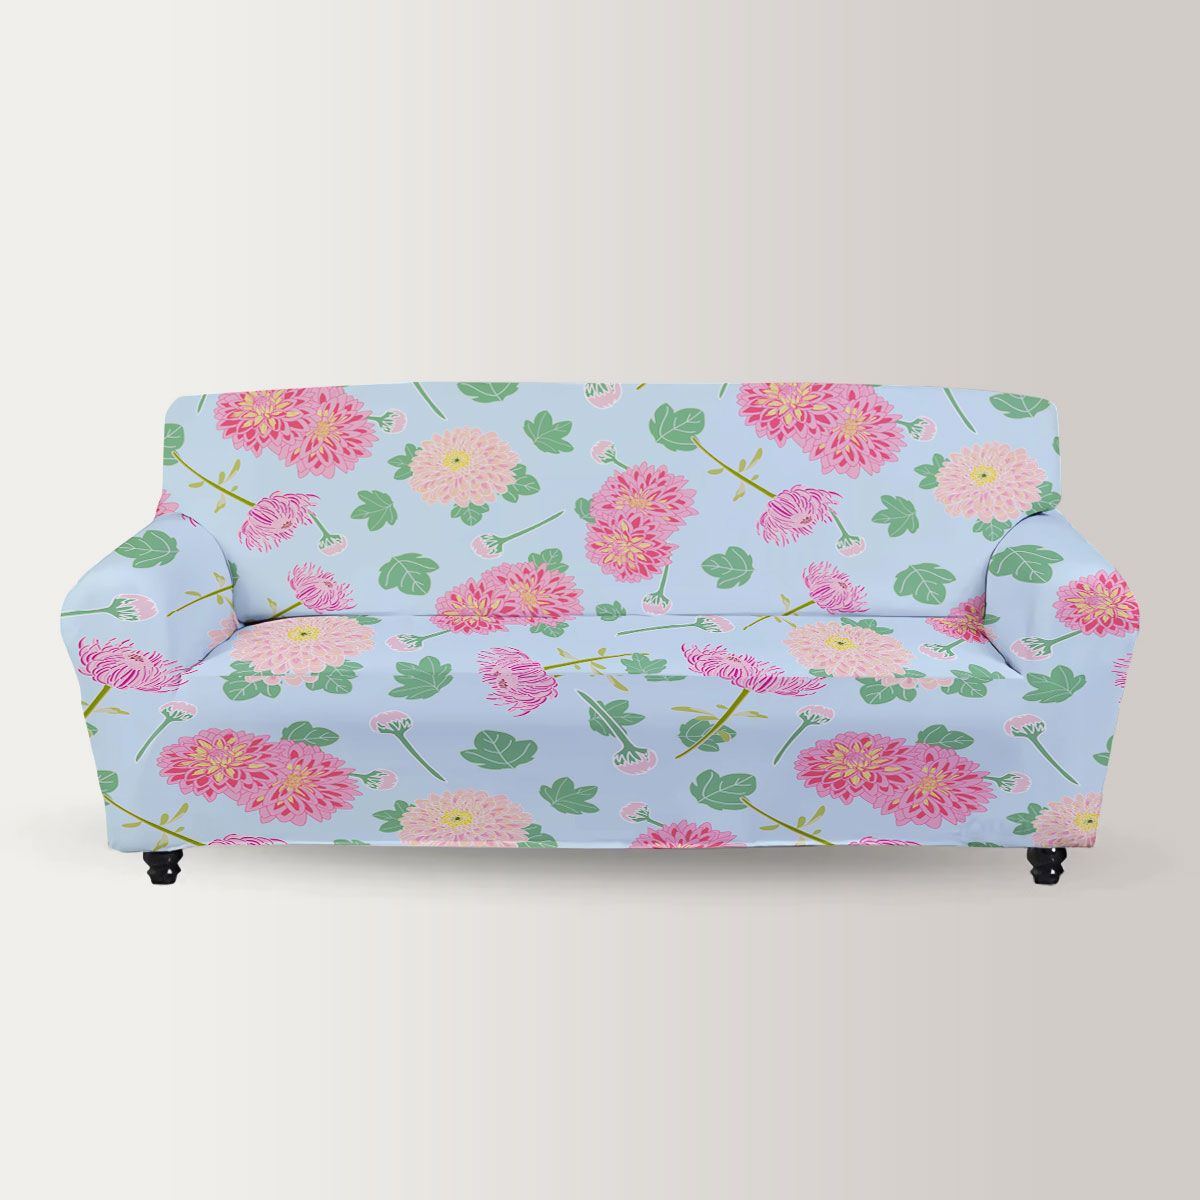 Pink Chrysanthemum Flowers And Leaves Sofa Cover